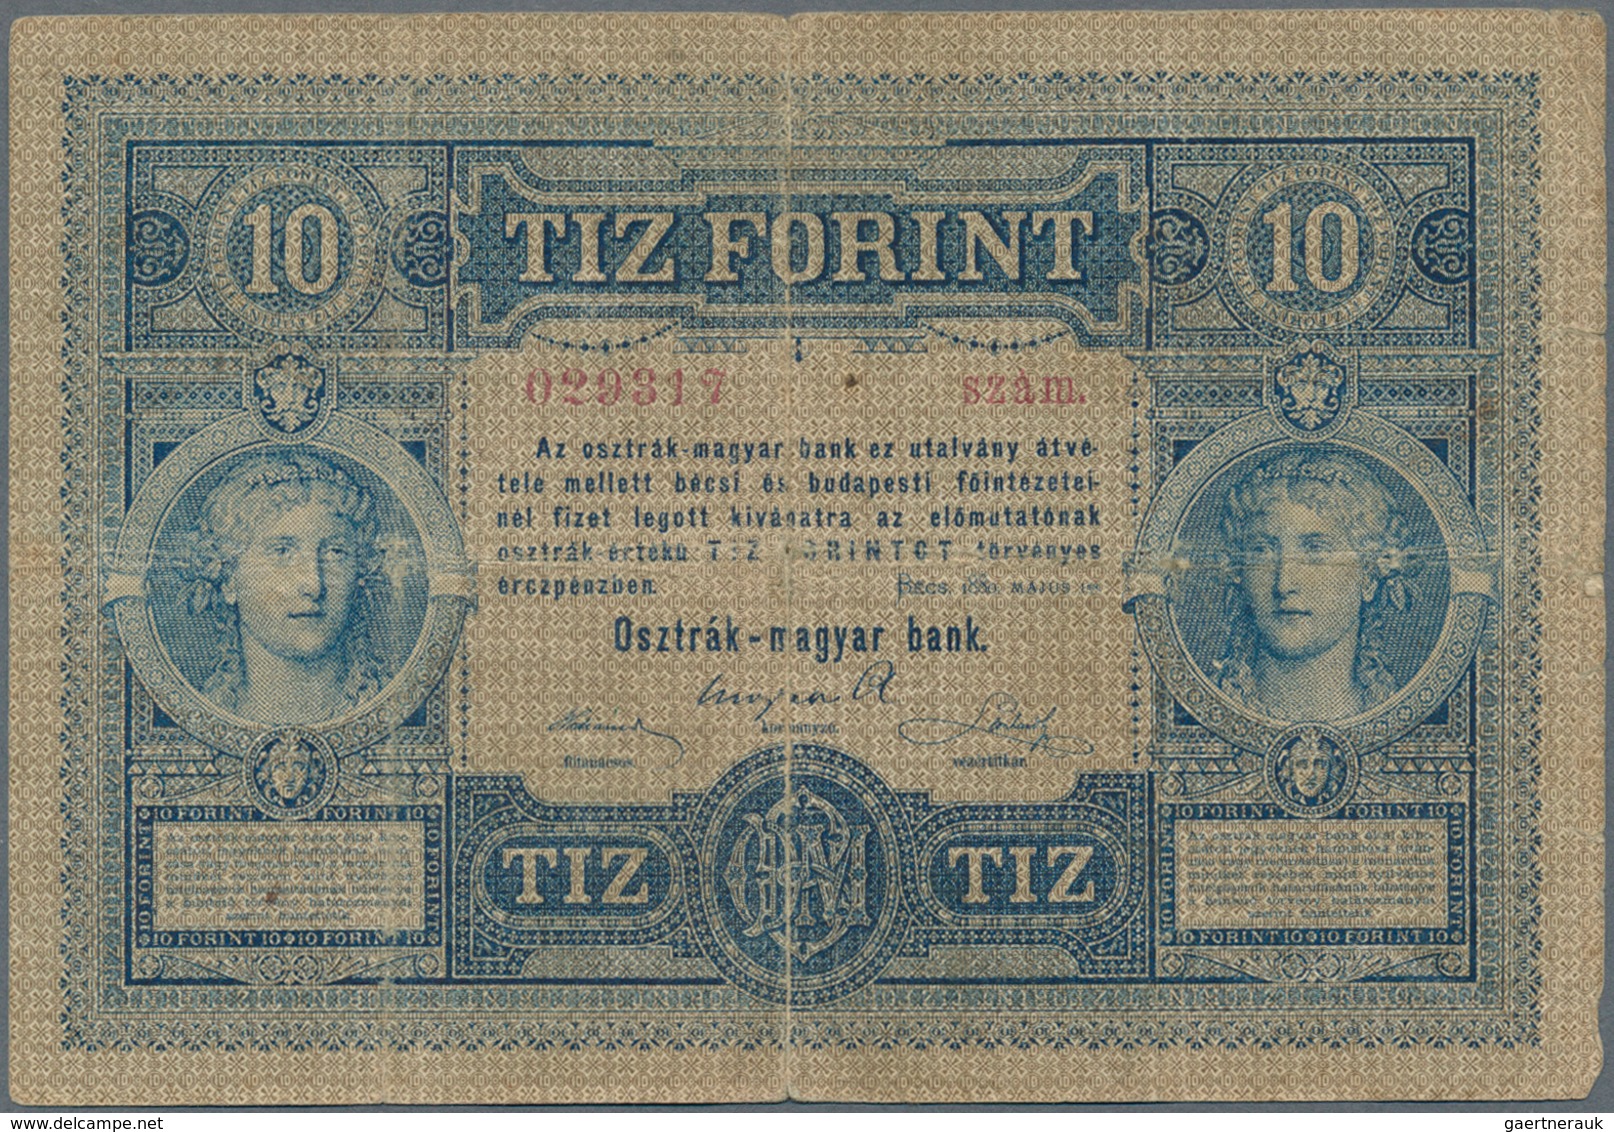 Austria / Österreich: 10 Gulden 1880 P. 1, S/N 029317, Used With Several Folds And Creases, Center H - Oostenrijk